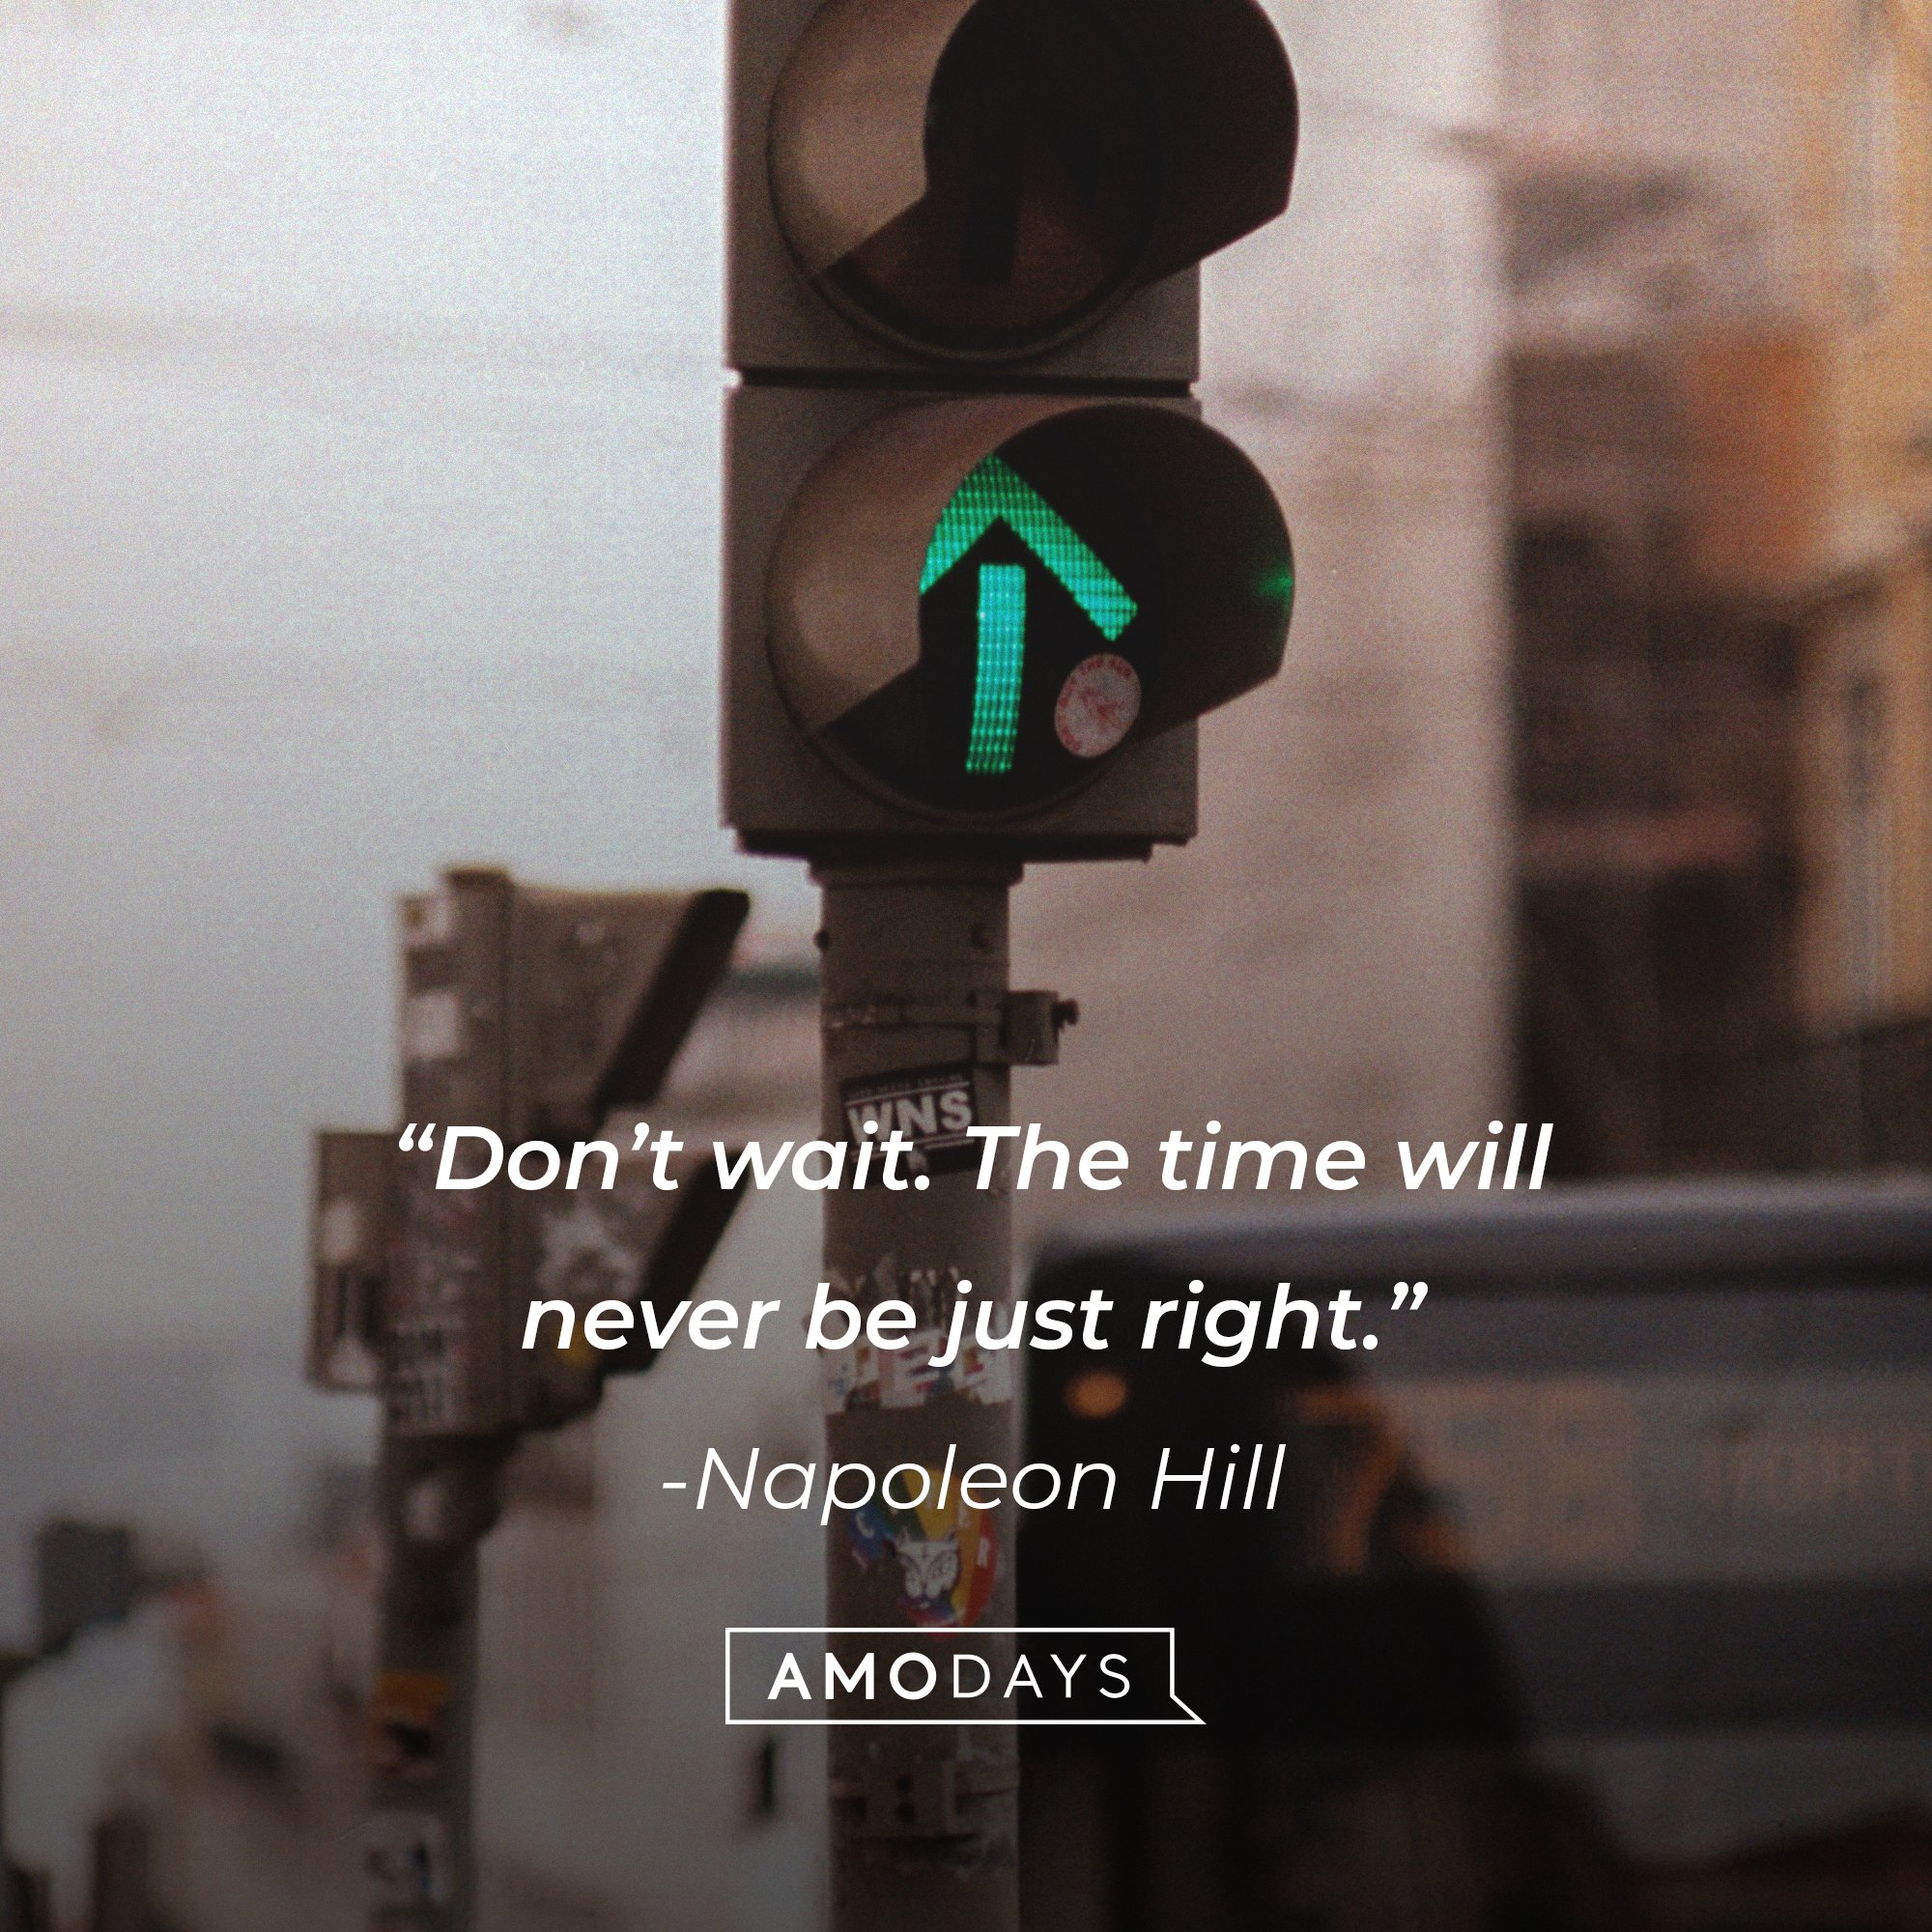 Napoleon Hill's quote: “Don’t wait. The time will never be just right.” | Image: AmoDays